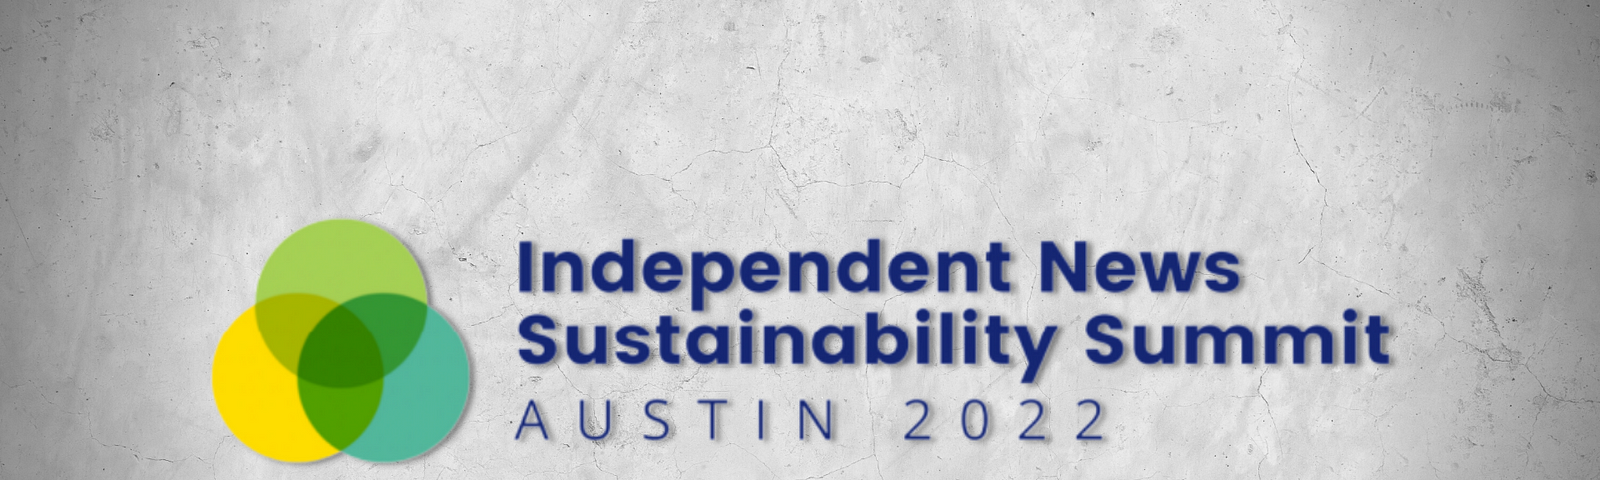 The logo for the Independent News Sustainability Summit against a white marble background.